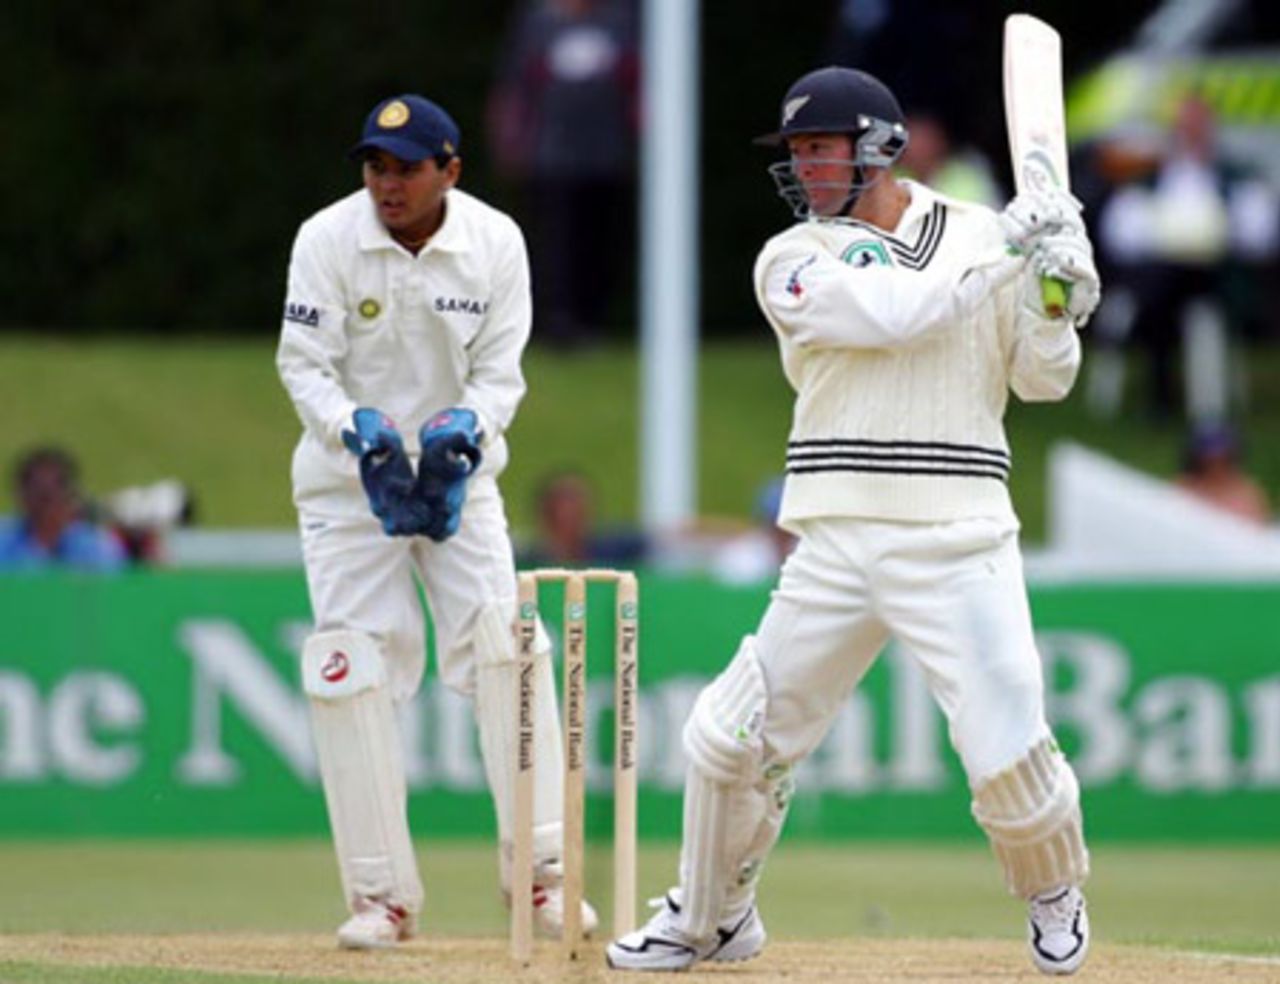 New Zealand batsman Nathan Astle cuts a delivery from Indian bowler Harbhajan Singh during his second innings of 14 as wicket-keeper Parthiv Patel looks on. 2nd Test: New Zealand v India at Westpac Park, Hamilton, 19-23 December 2002 (22 December 2002).